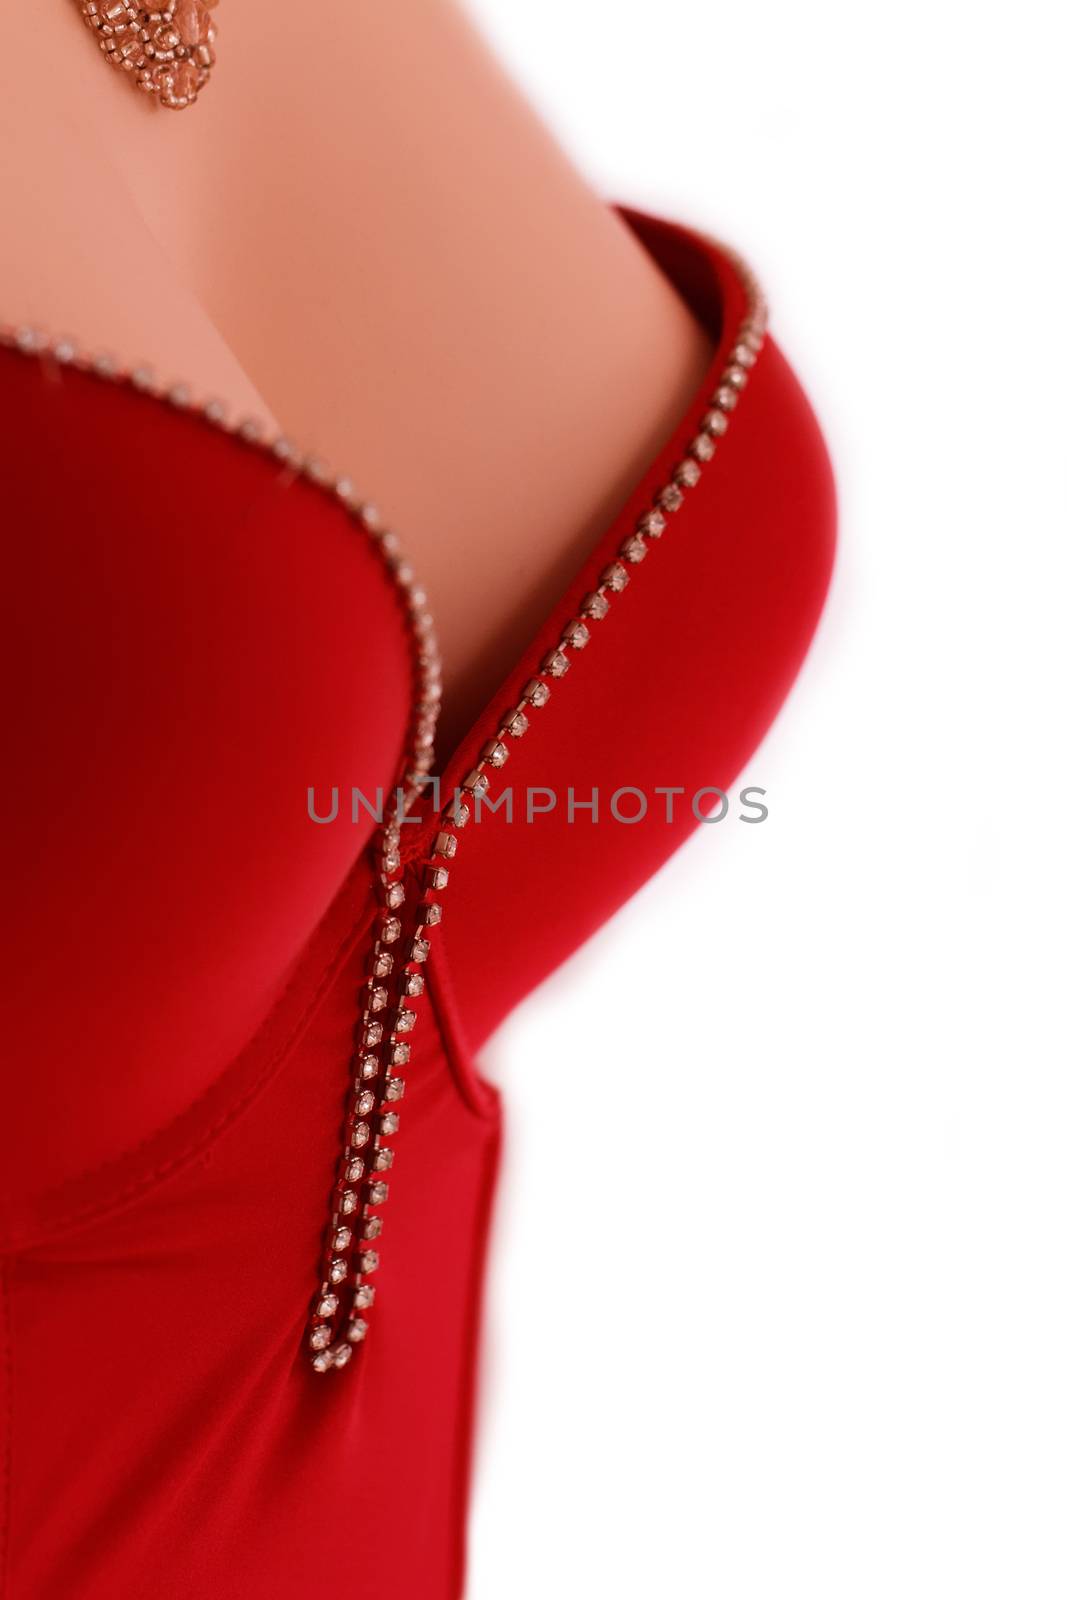 Photo of a mannequin in red bodice